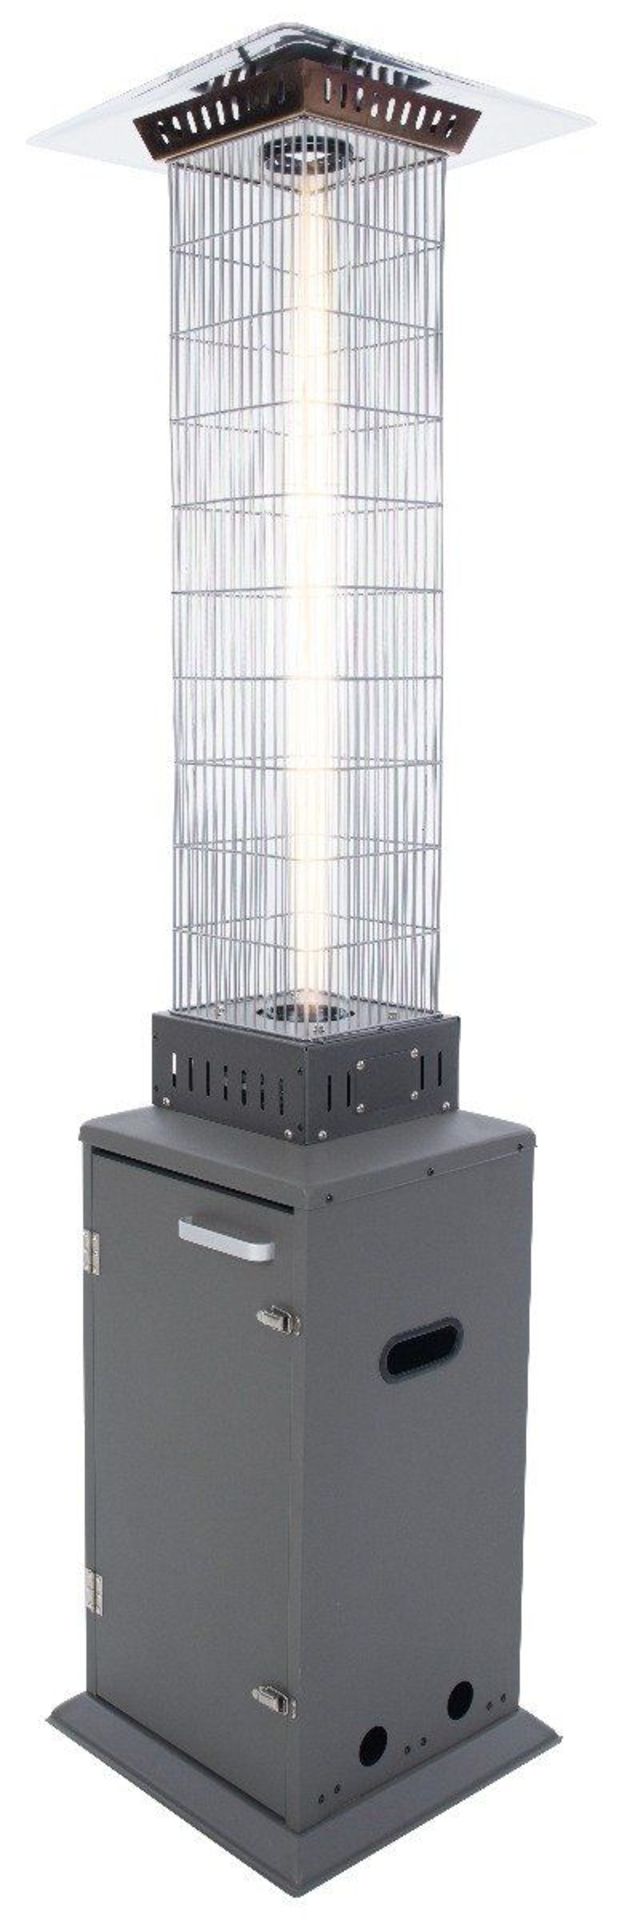 Trade lot to include 4 x Brand New The Sunred Atria Flame Torch Gas Heater Grey RRP £499 is a high